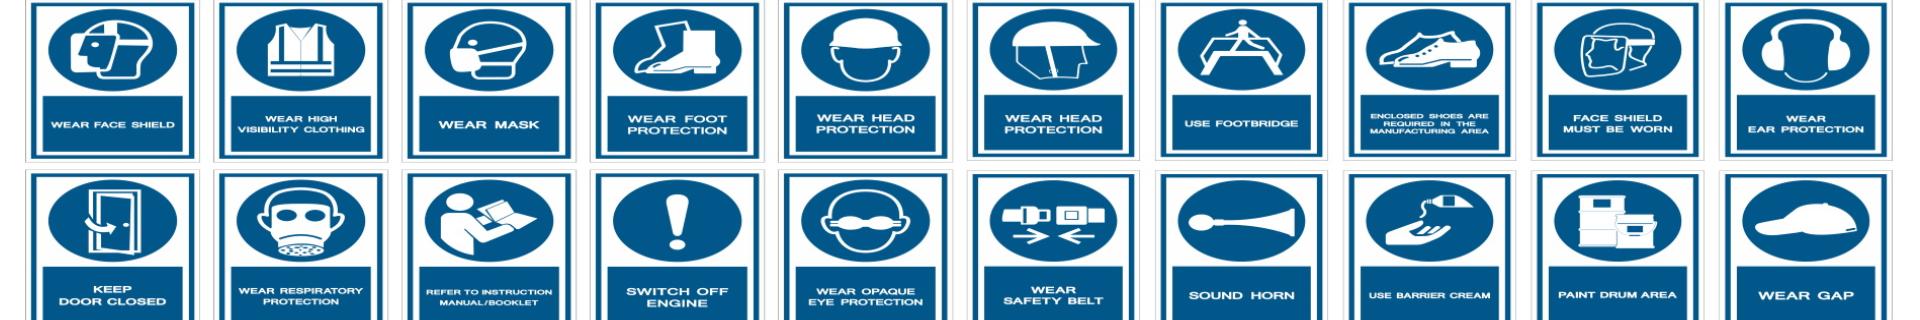 Personal Protective Equipment in Construction Environments